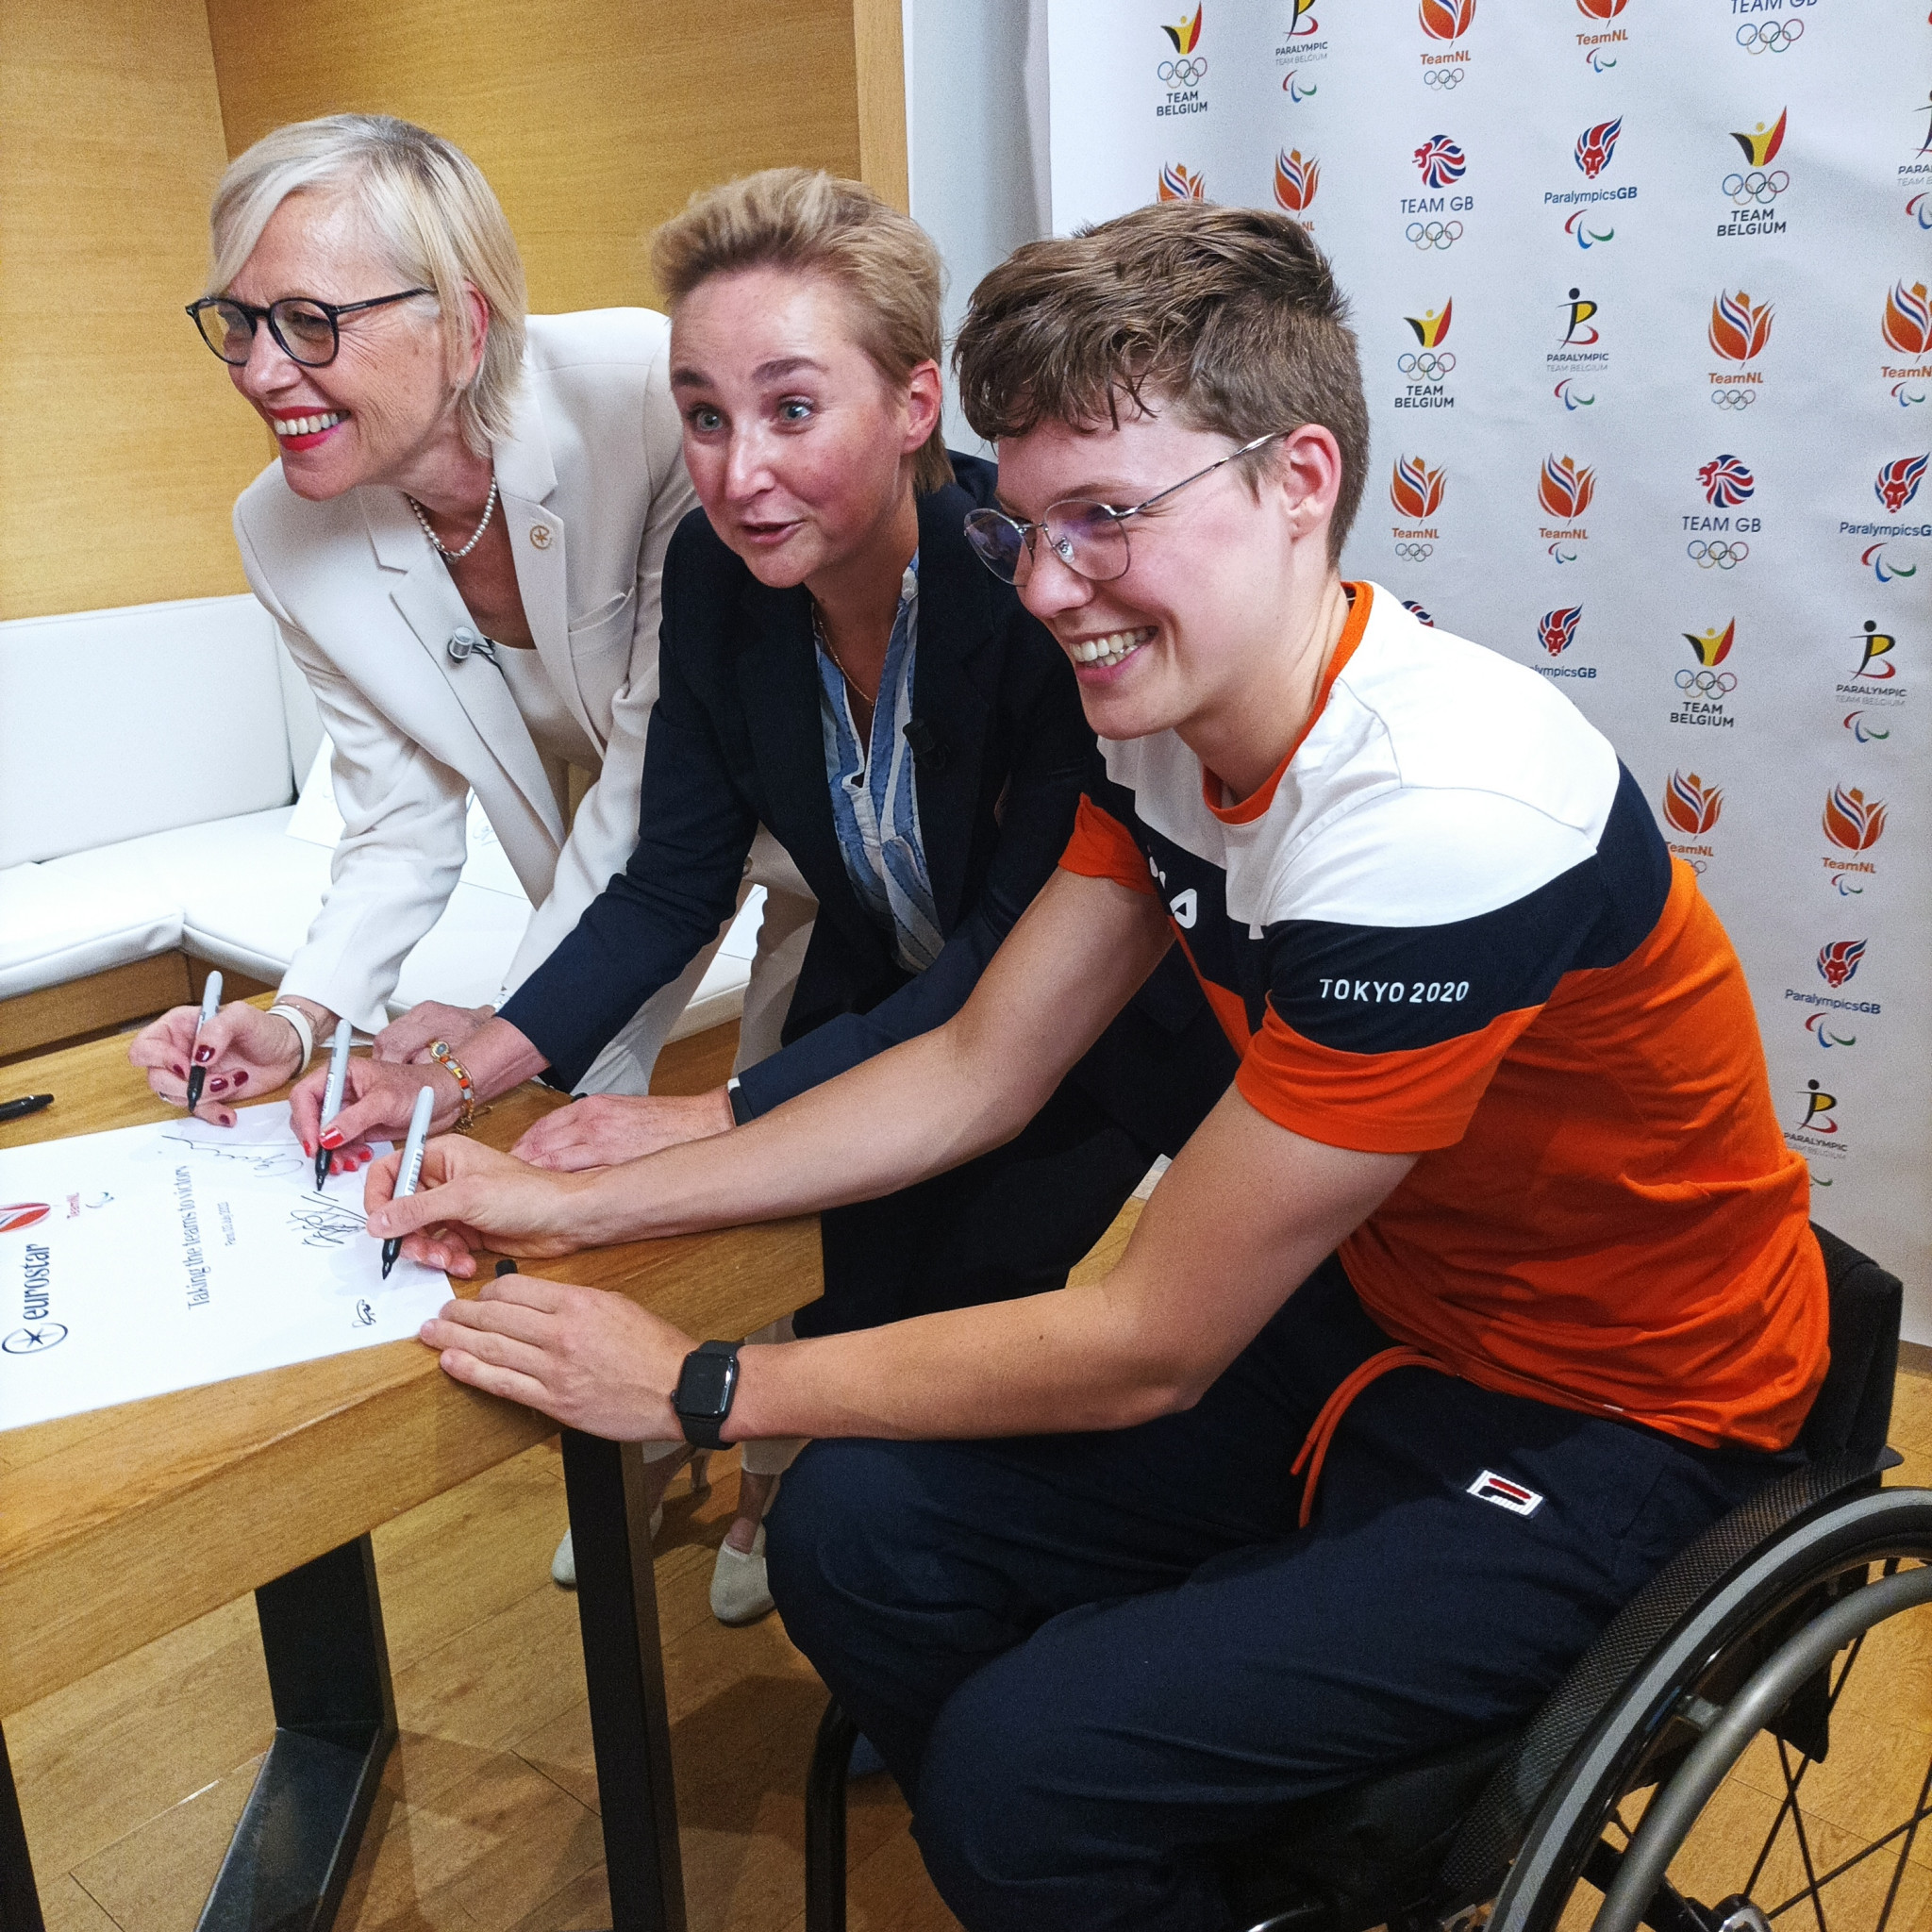 World wheelchair basketball player Bo Kramer, right, signed the deal which will ensure the Dutch team travels to Paris 2024 by Eurostar ©ITG